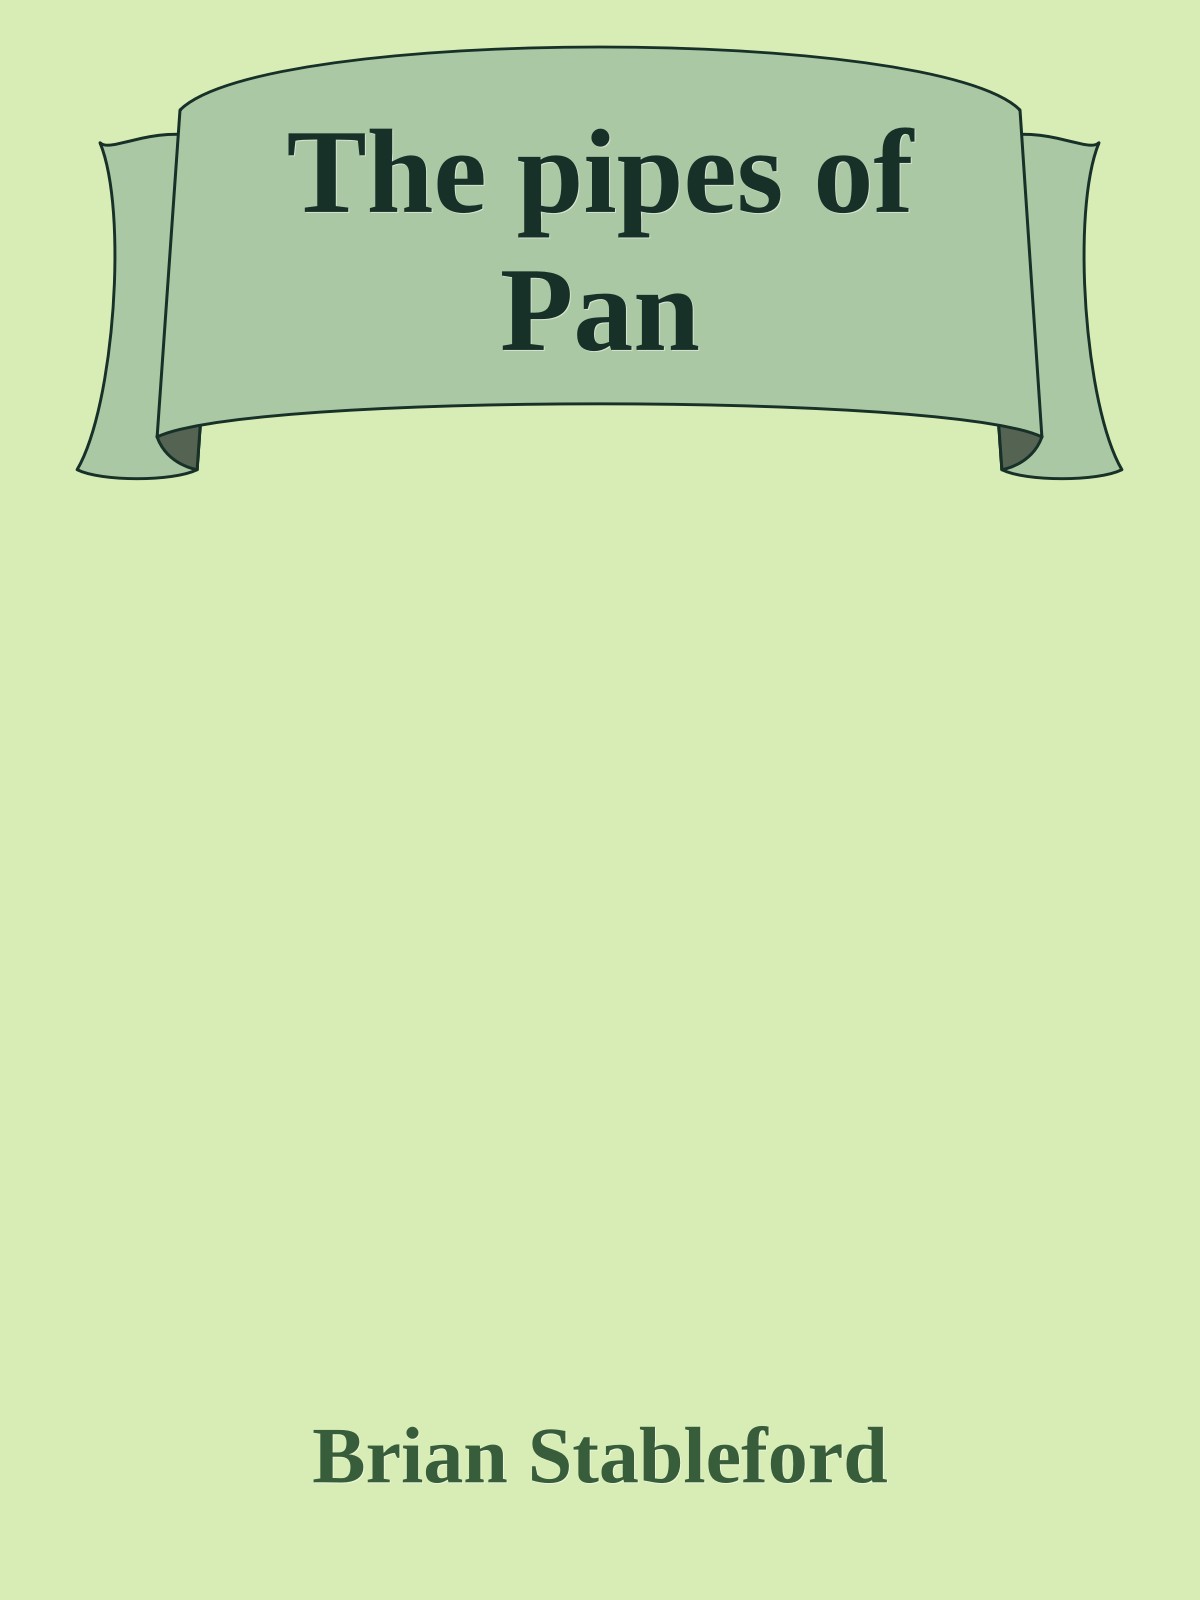 The pipes of Pan